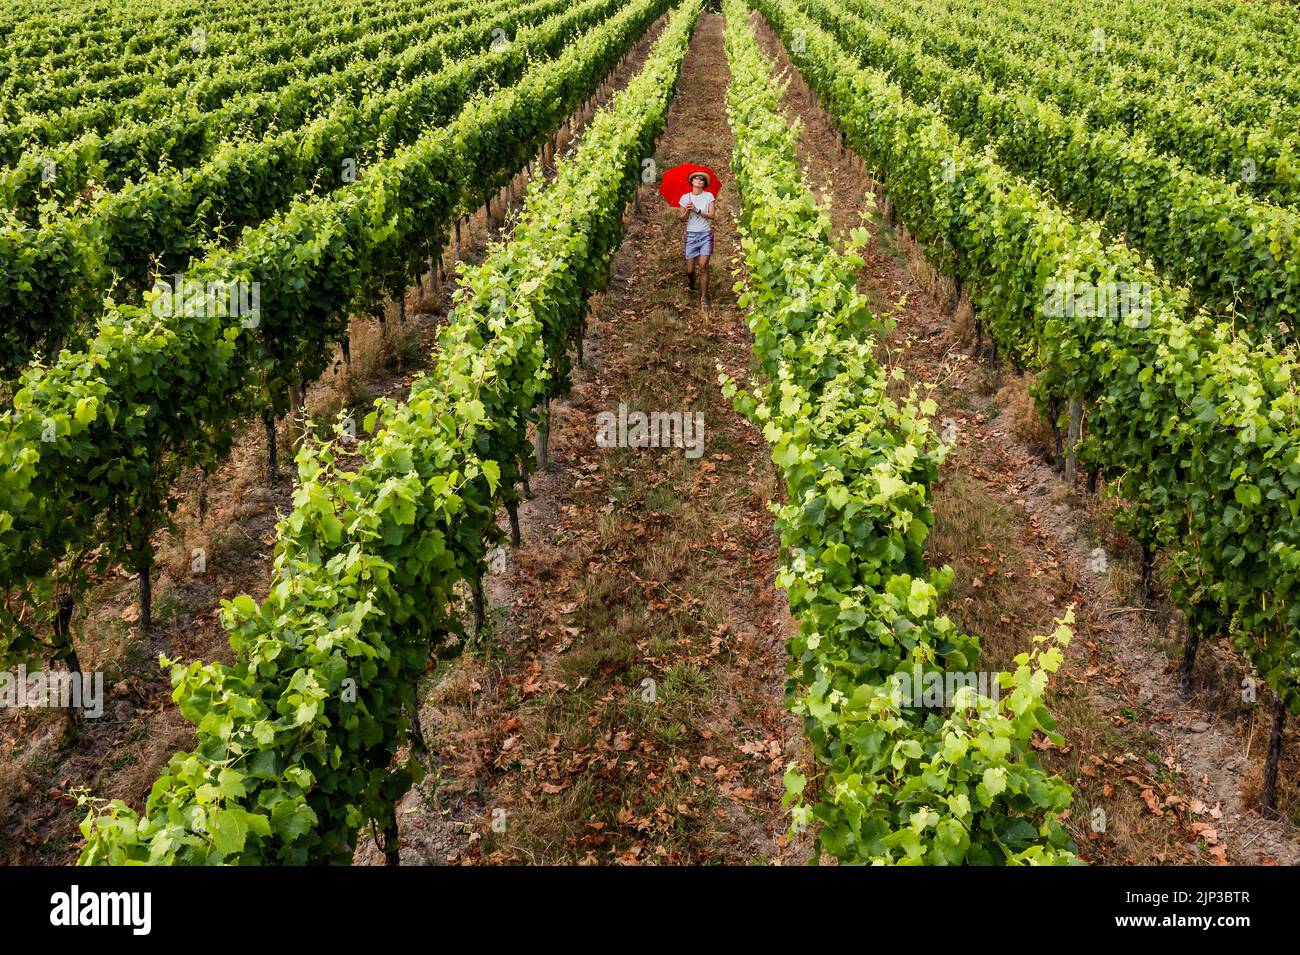 Sussex, UK. 15th Aug, 2022. A visitor shelters from the sun using an umbrella as a parasol - The vines in the Redfold vineyard, which makes Abriel sparkling wine (in east sussex), remain green because of their deep roots but the fields are scorched yellow around them. The second short heatwave and the announcement of drought conditions in much of the UK. Credit: Guy Bell/Alamy Live News Stock Photo